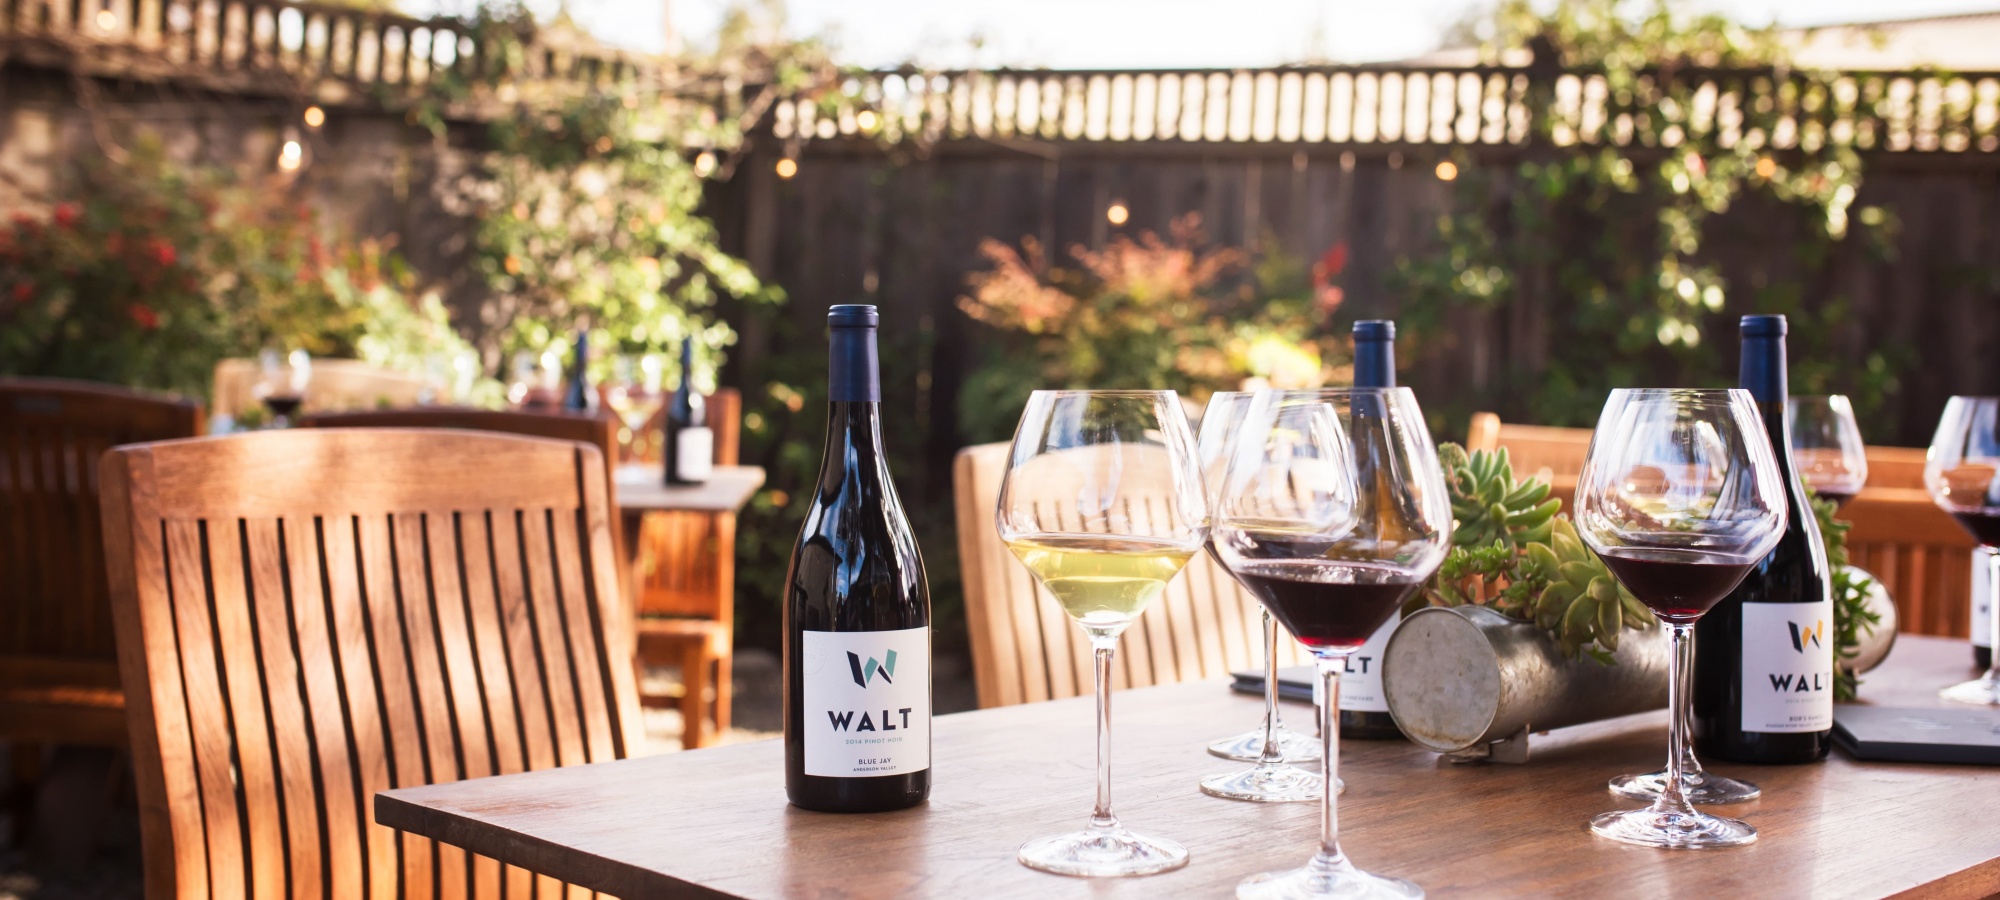 Walt Wines on outdoor table next to glasses of wine.